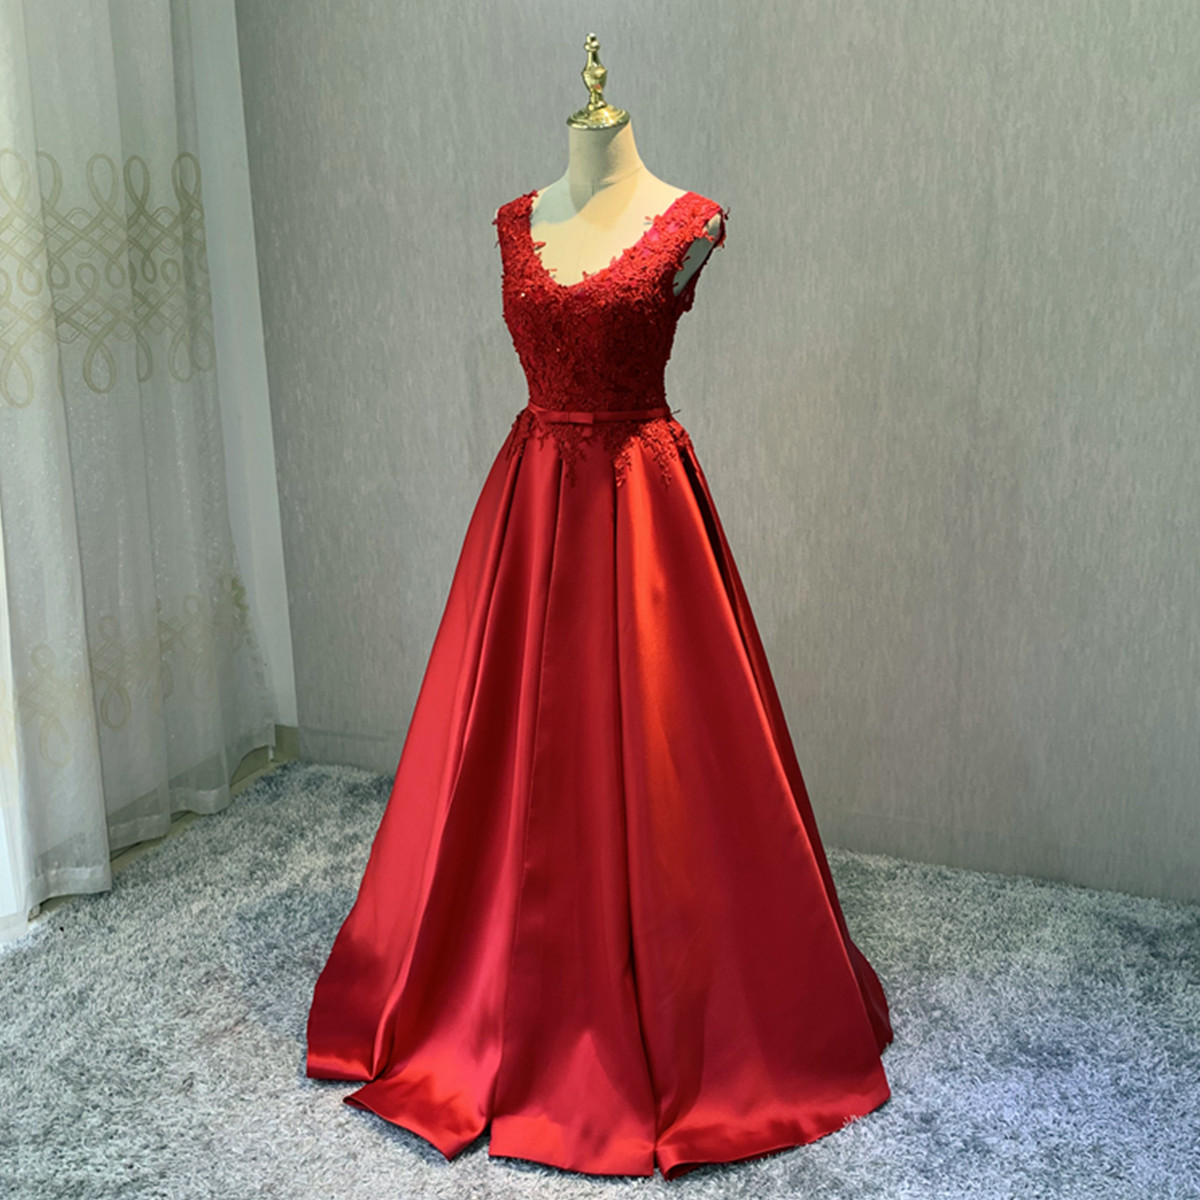 Red Satin And Lace V-neckline Long Party Dress, Red Prom Dresses 2021